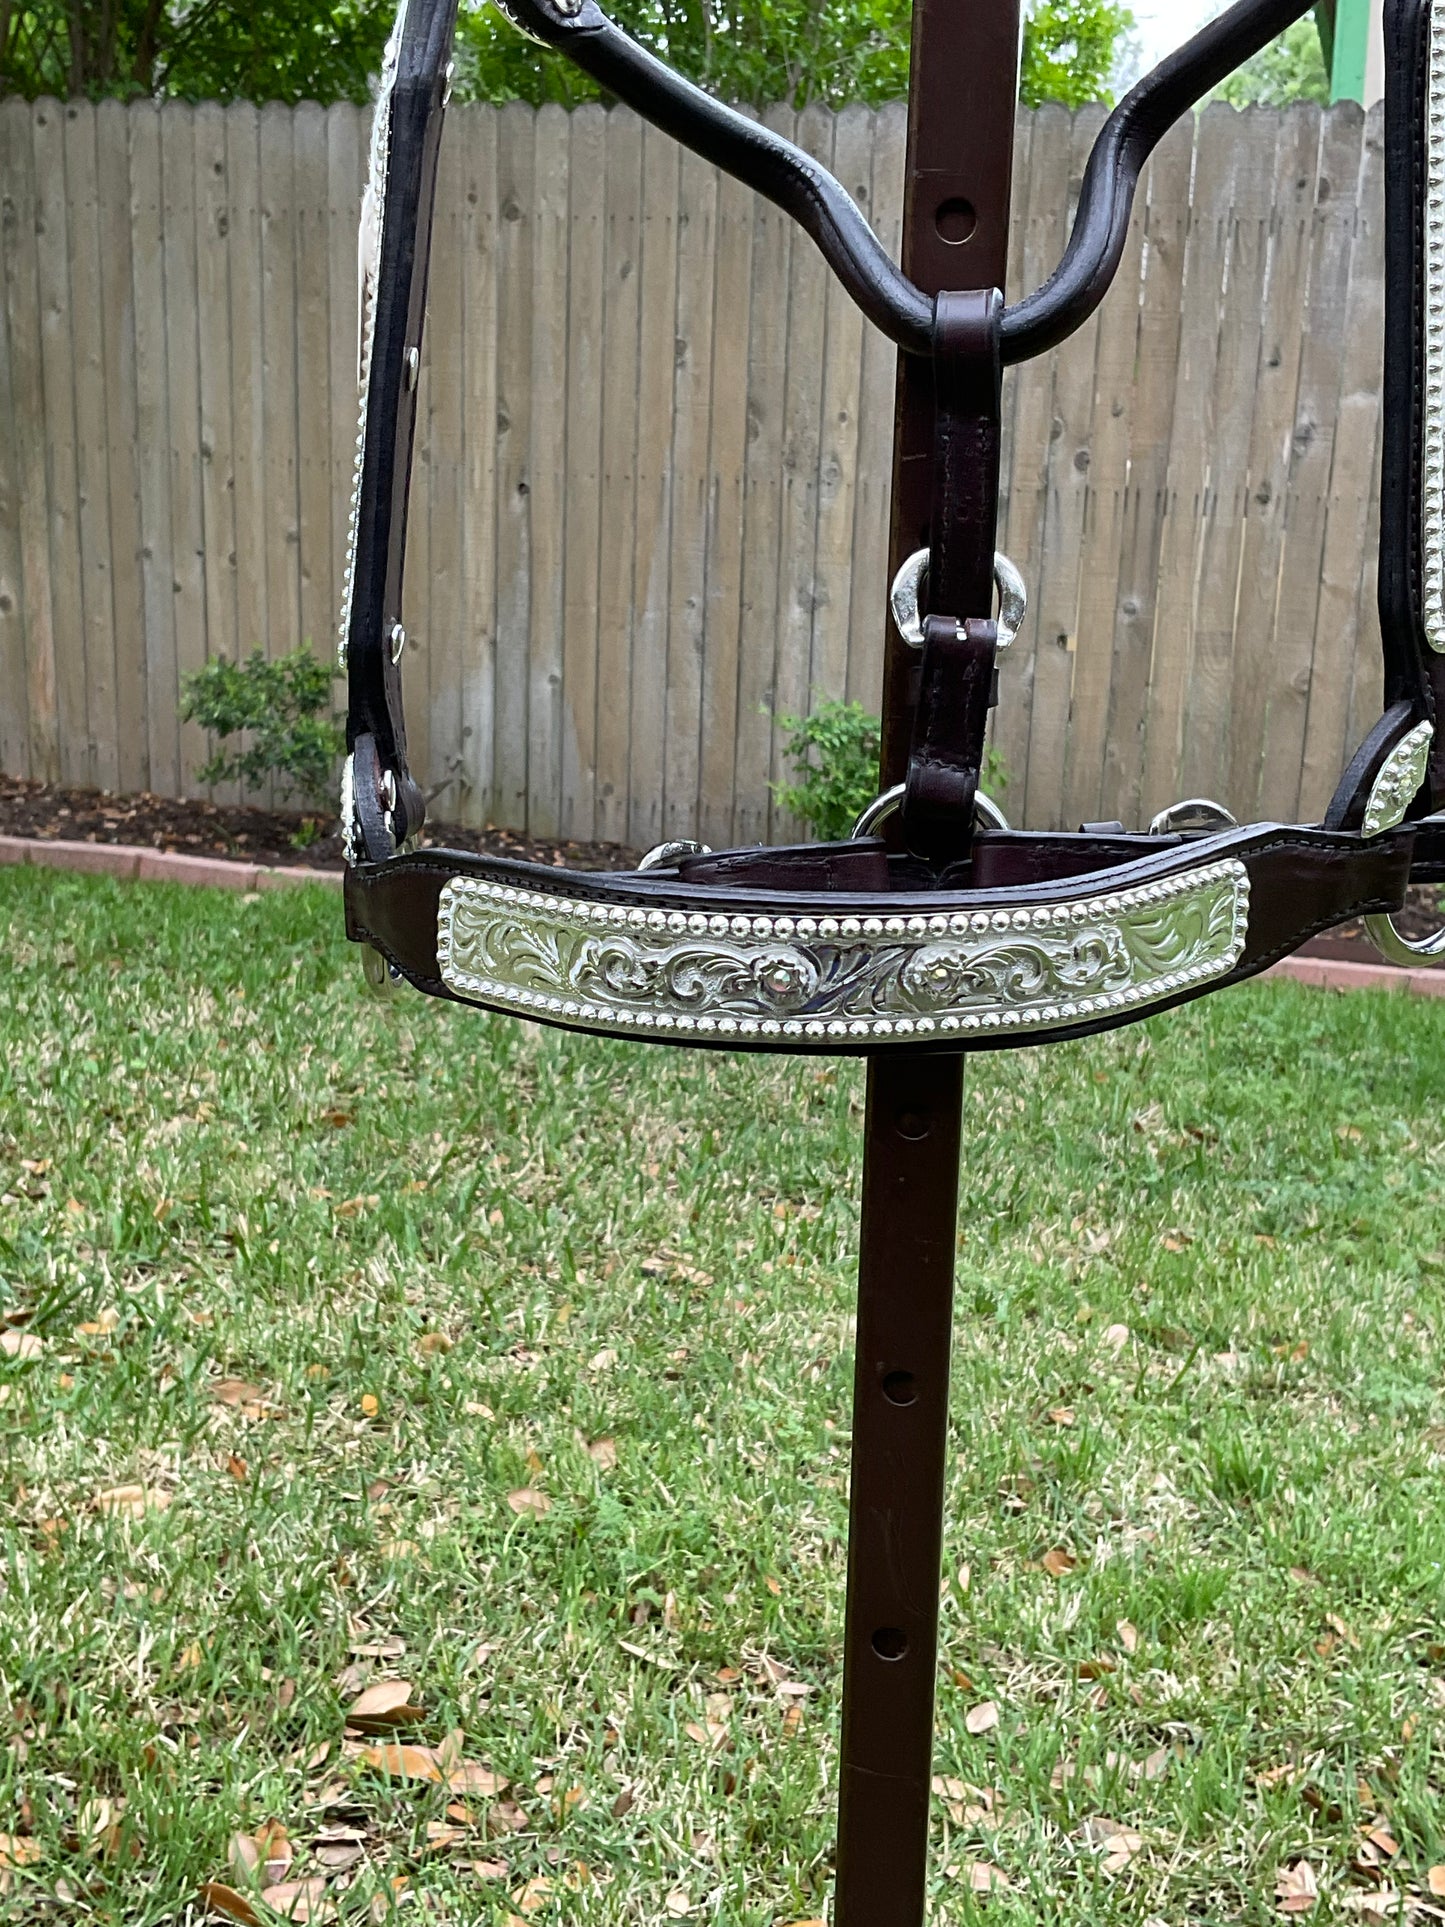 Mare sized show halter with Prism stones Round Buckle